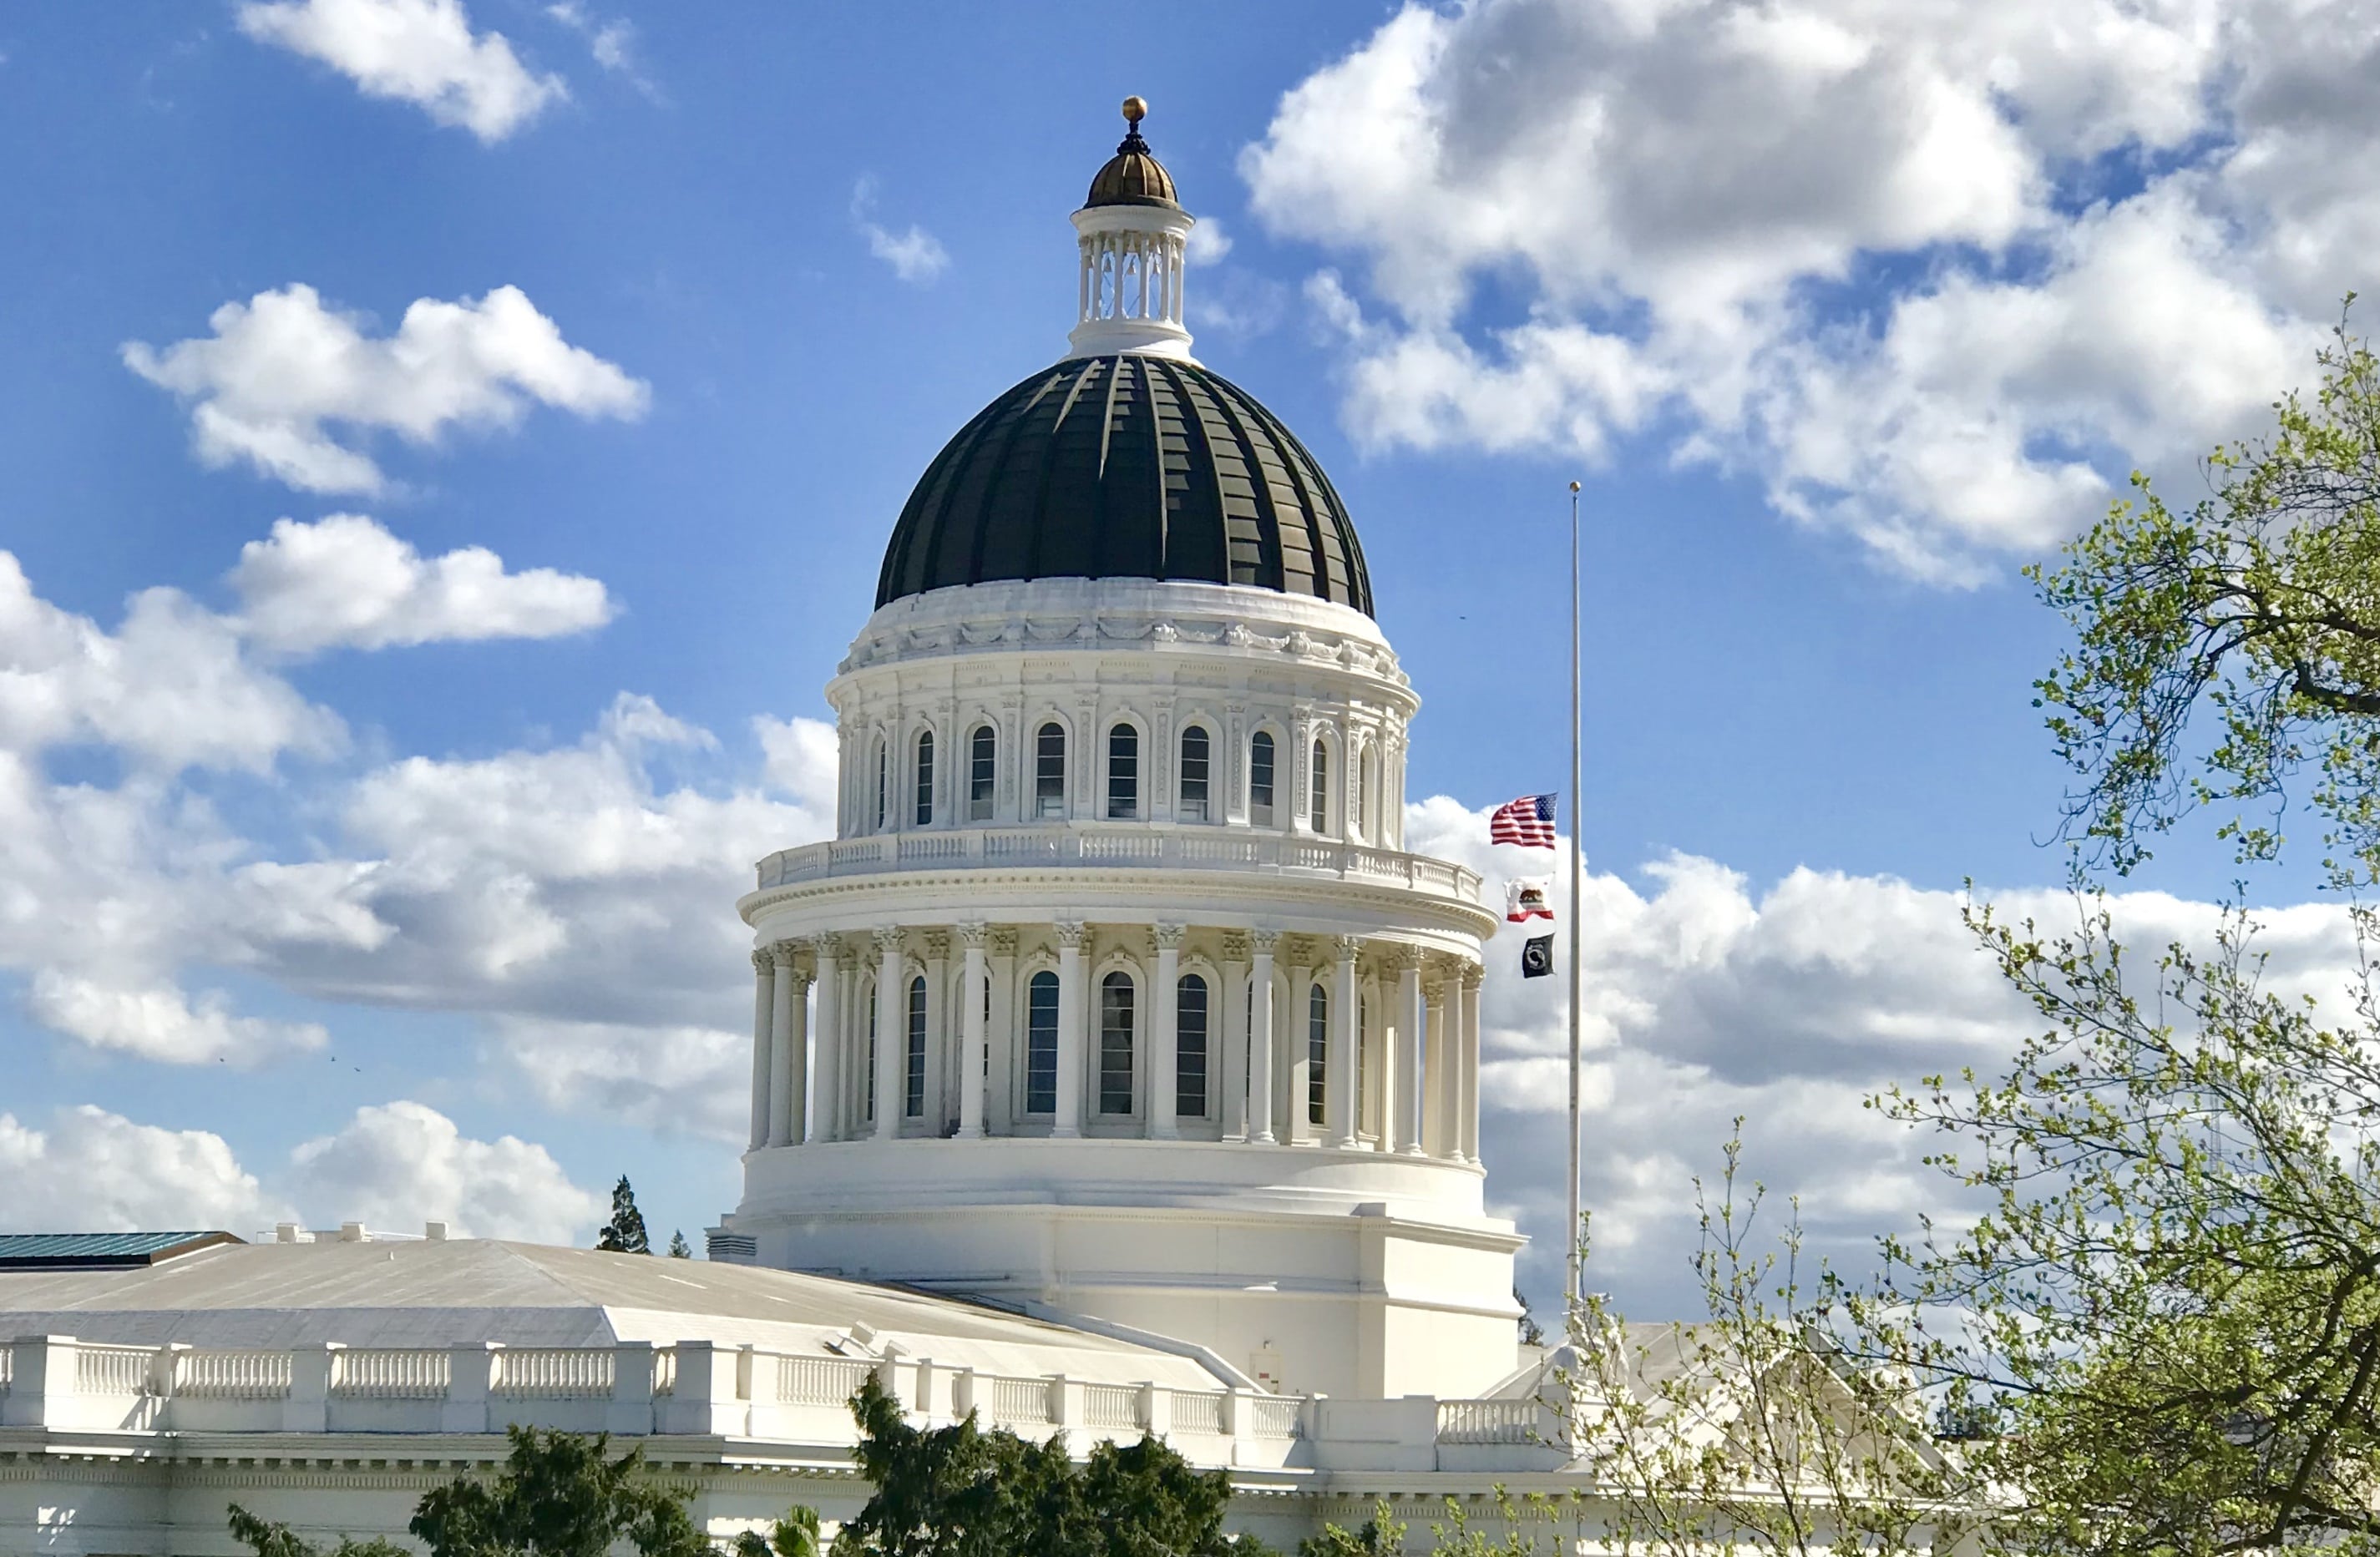 Governor Brown Issues Statement on Death of Caltrans Worker